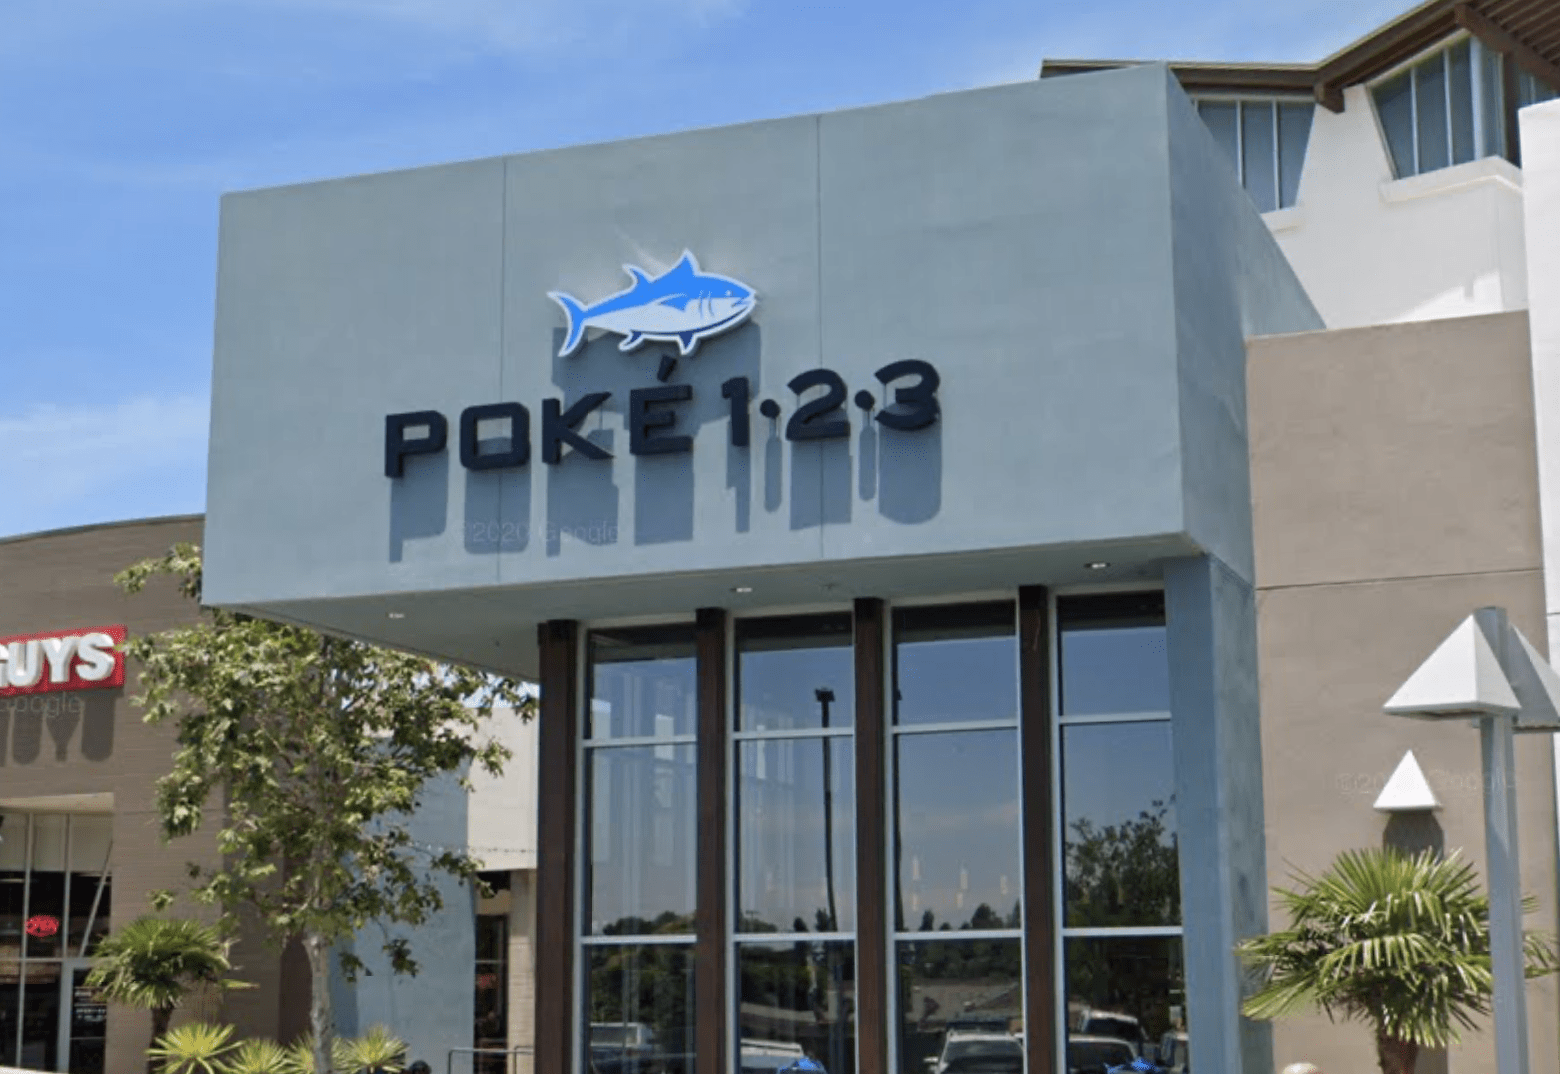 Custom LED Sign or Marquee Letters for Poke 123